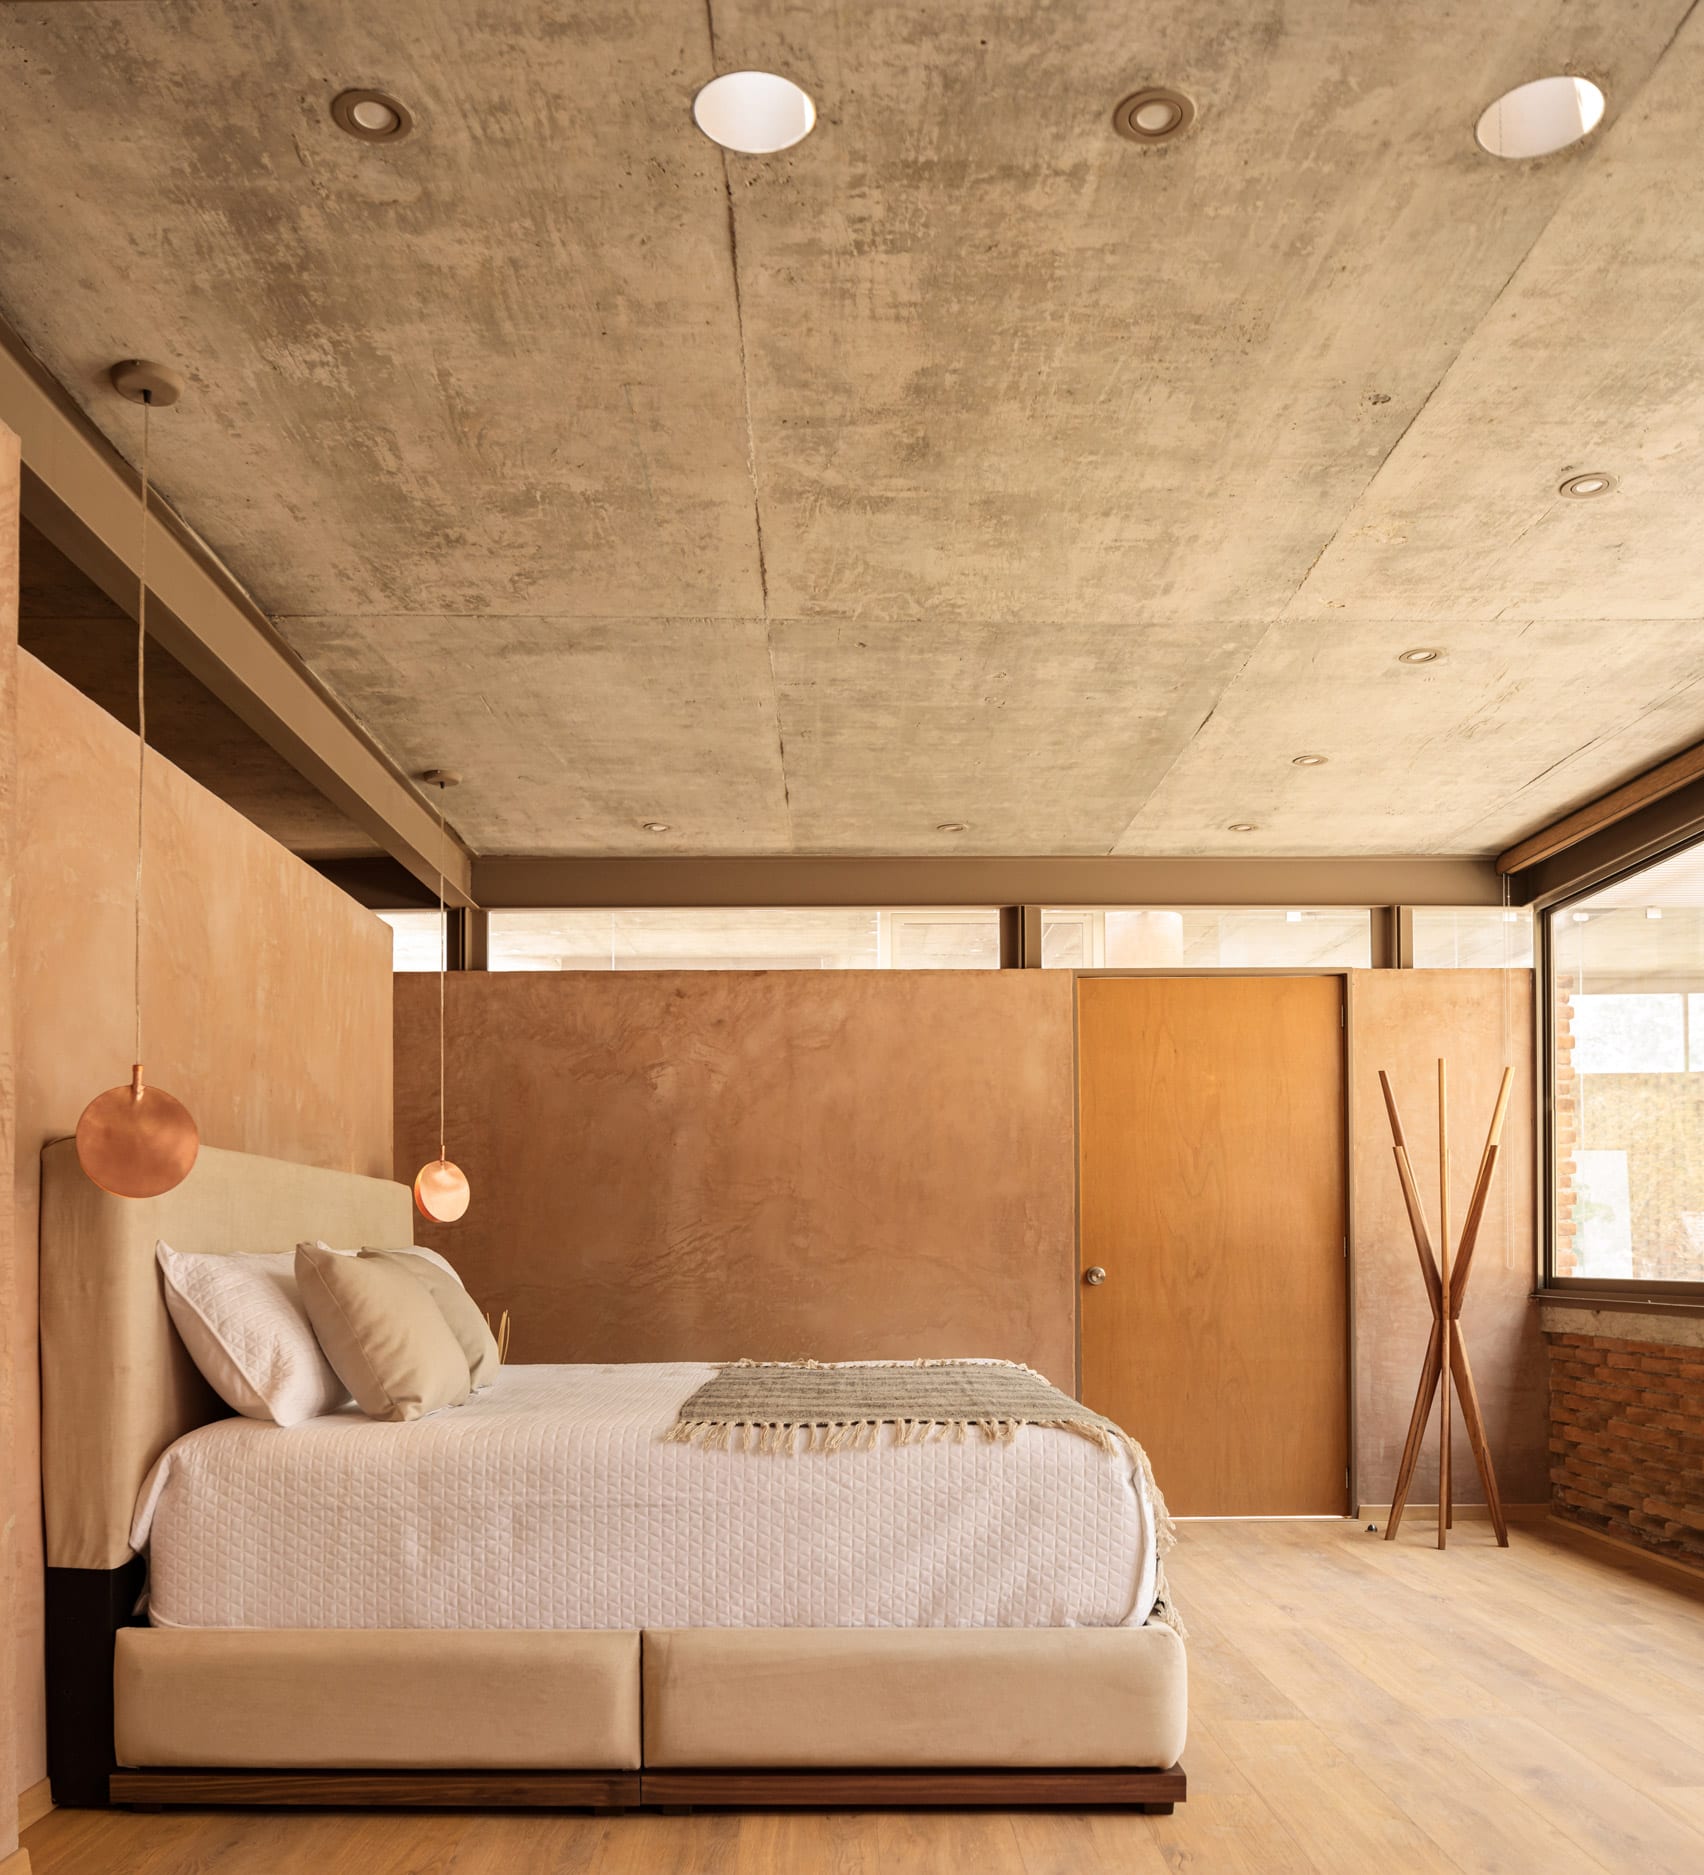 Bedroom of house in Mexico with pigmented concrete walls